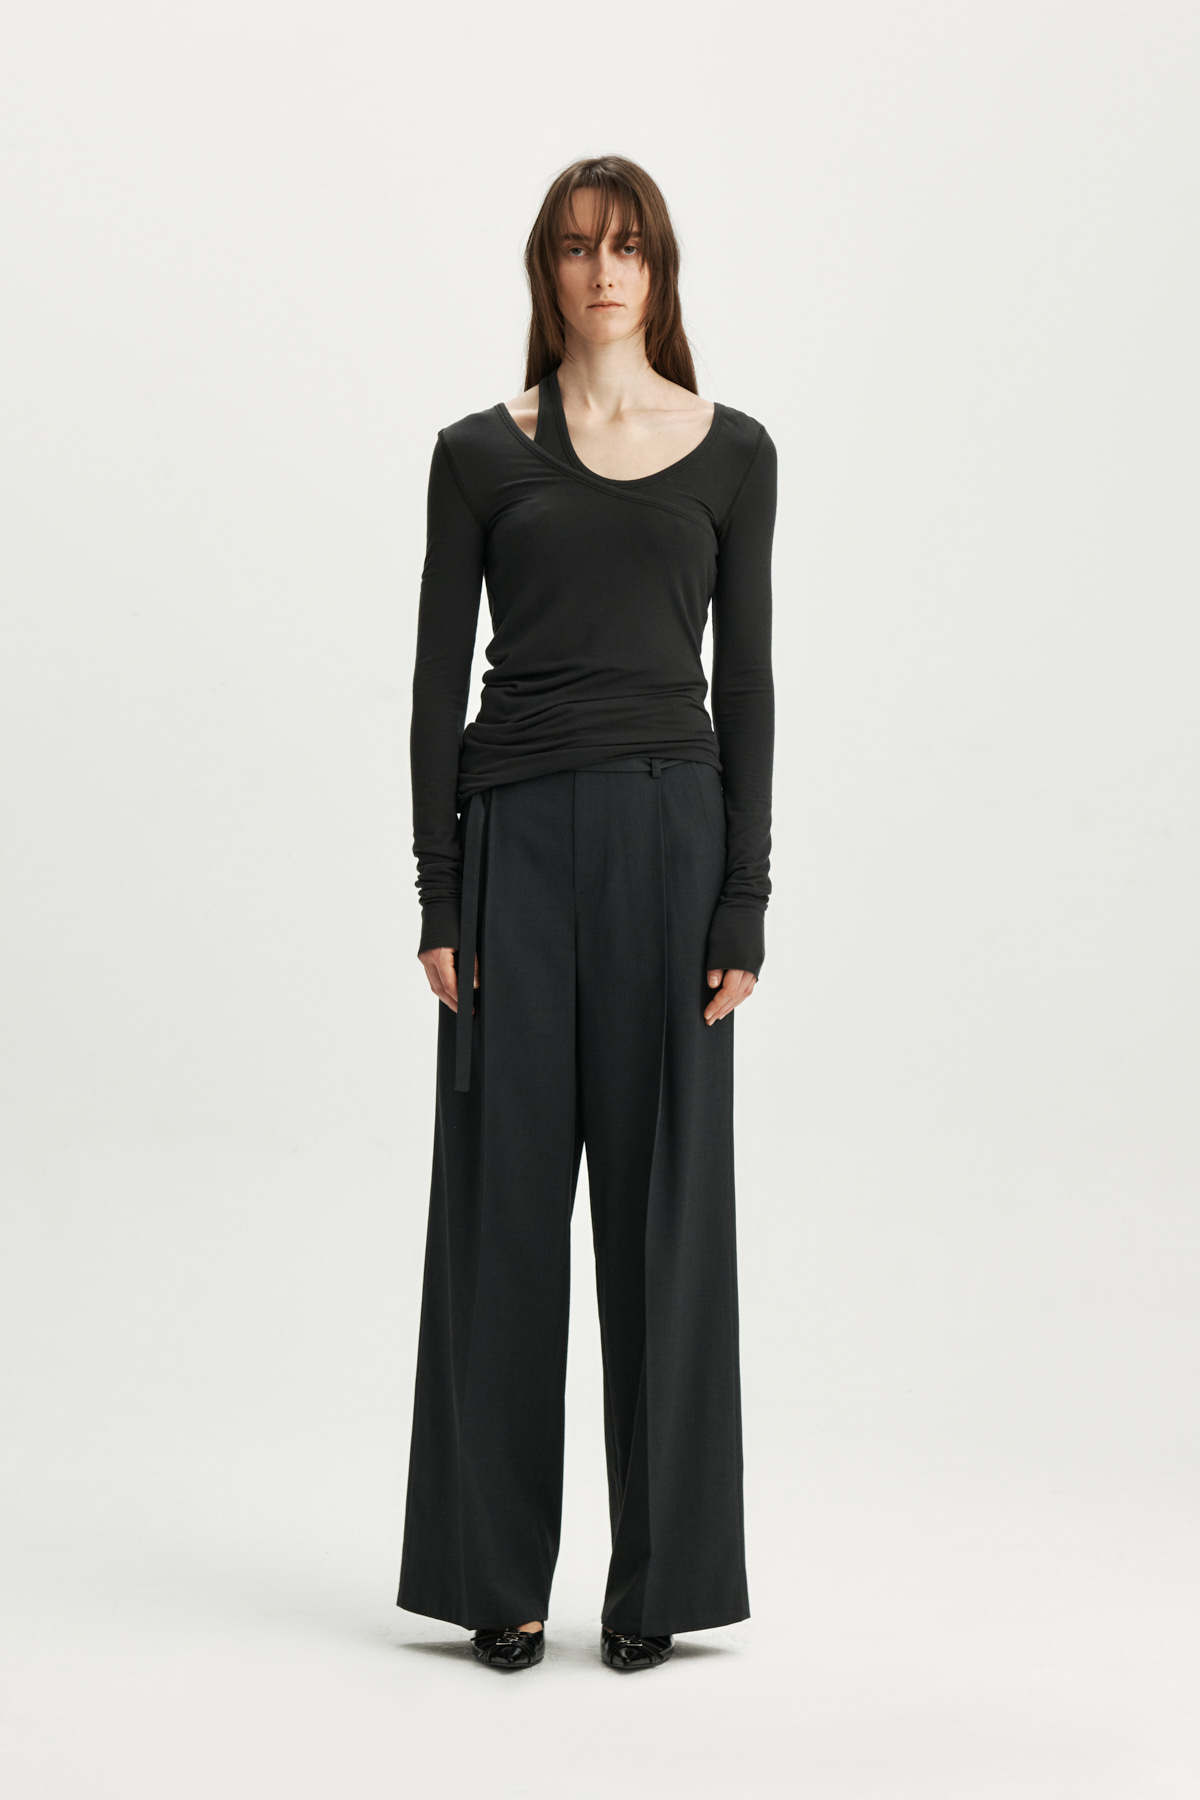 BELTED WIDE TROUSER IN CHARCOAL